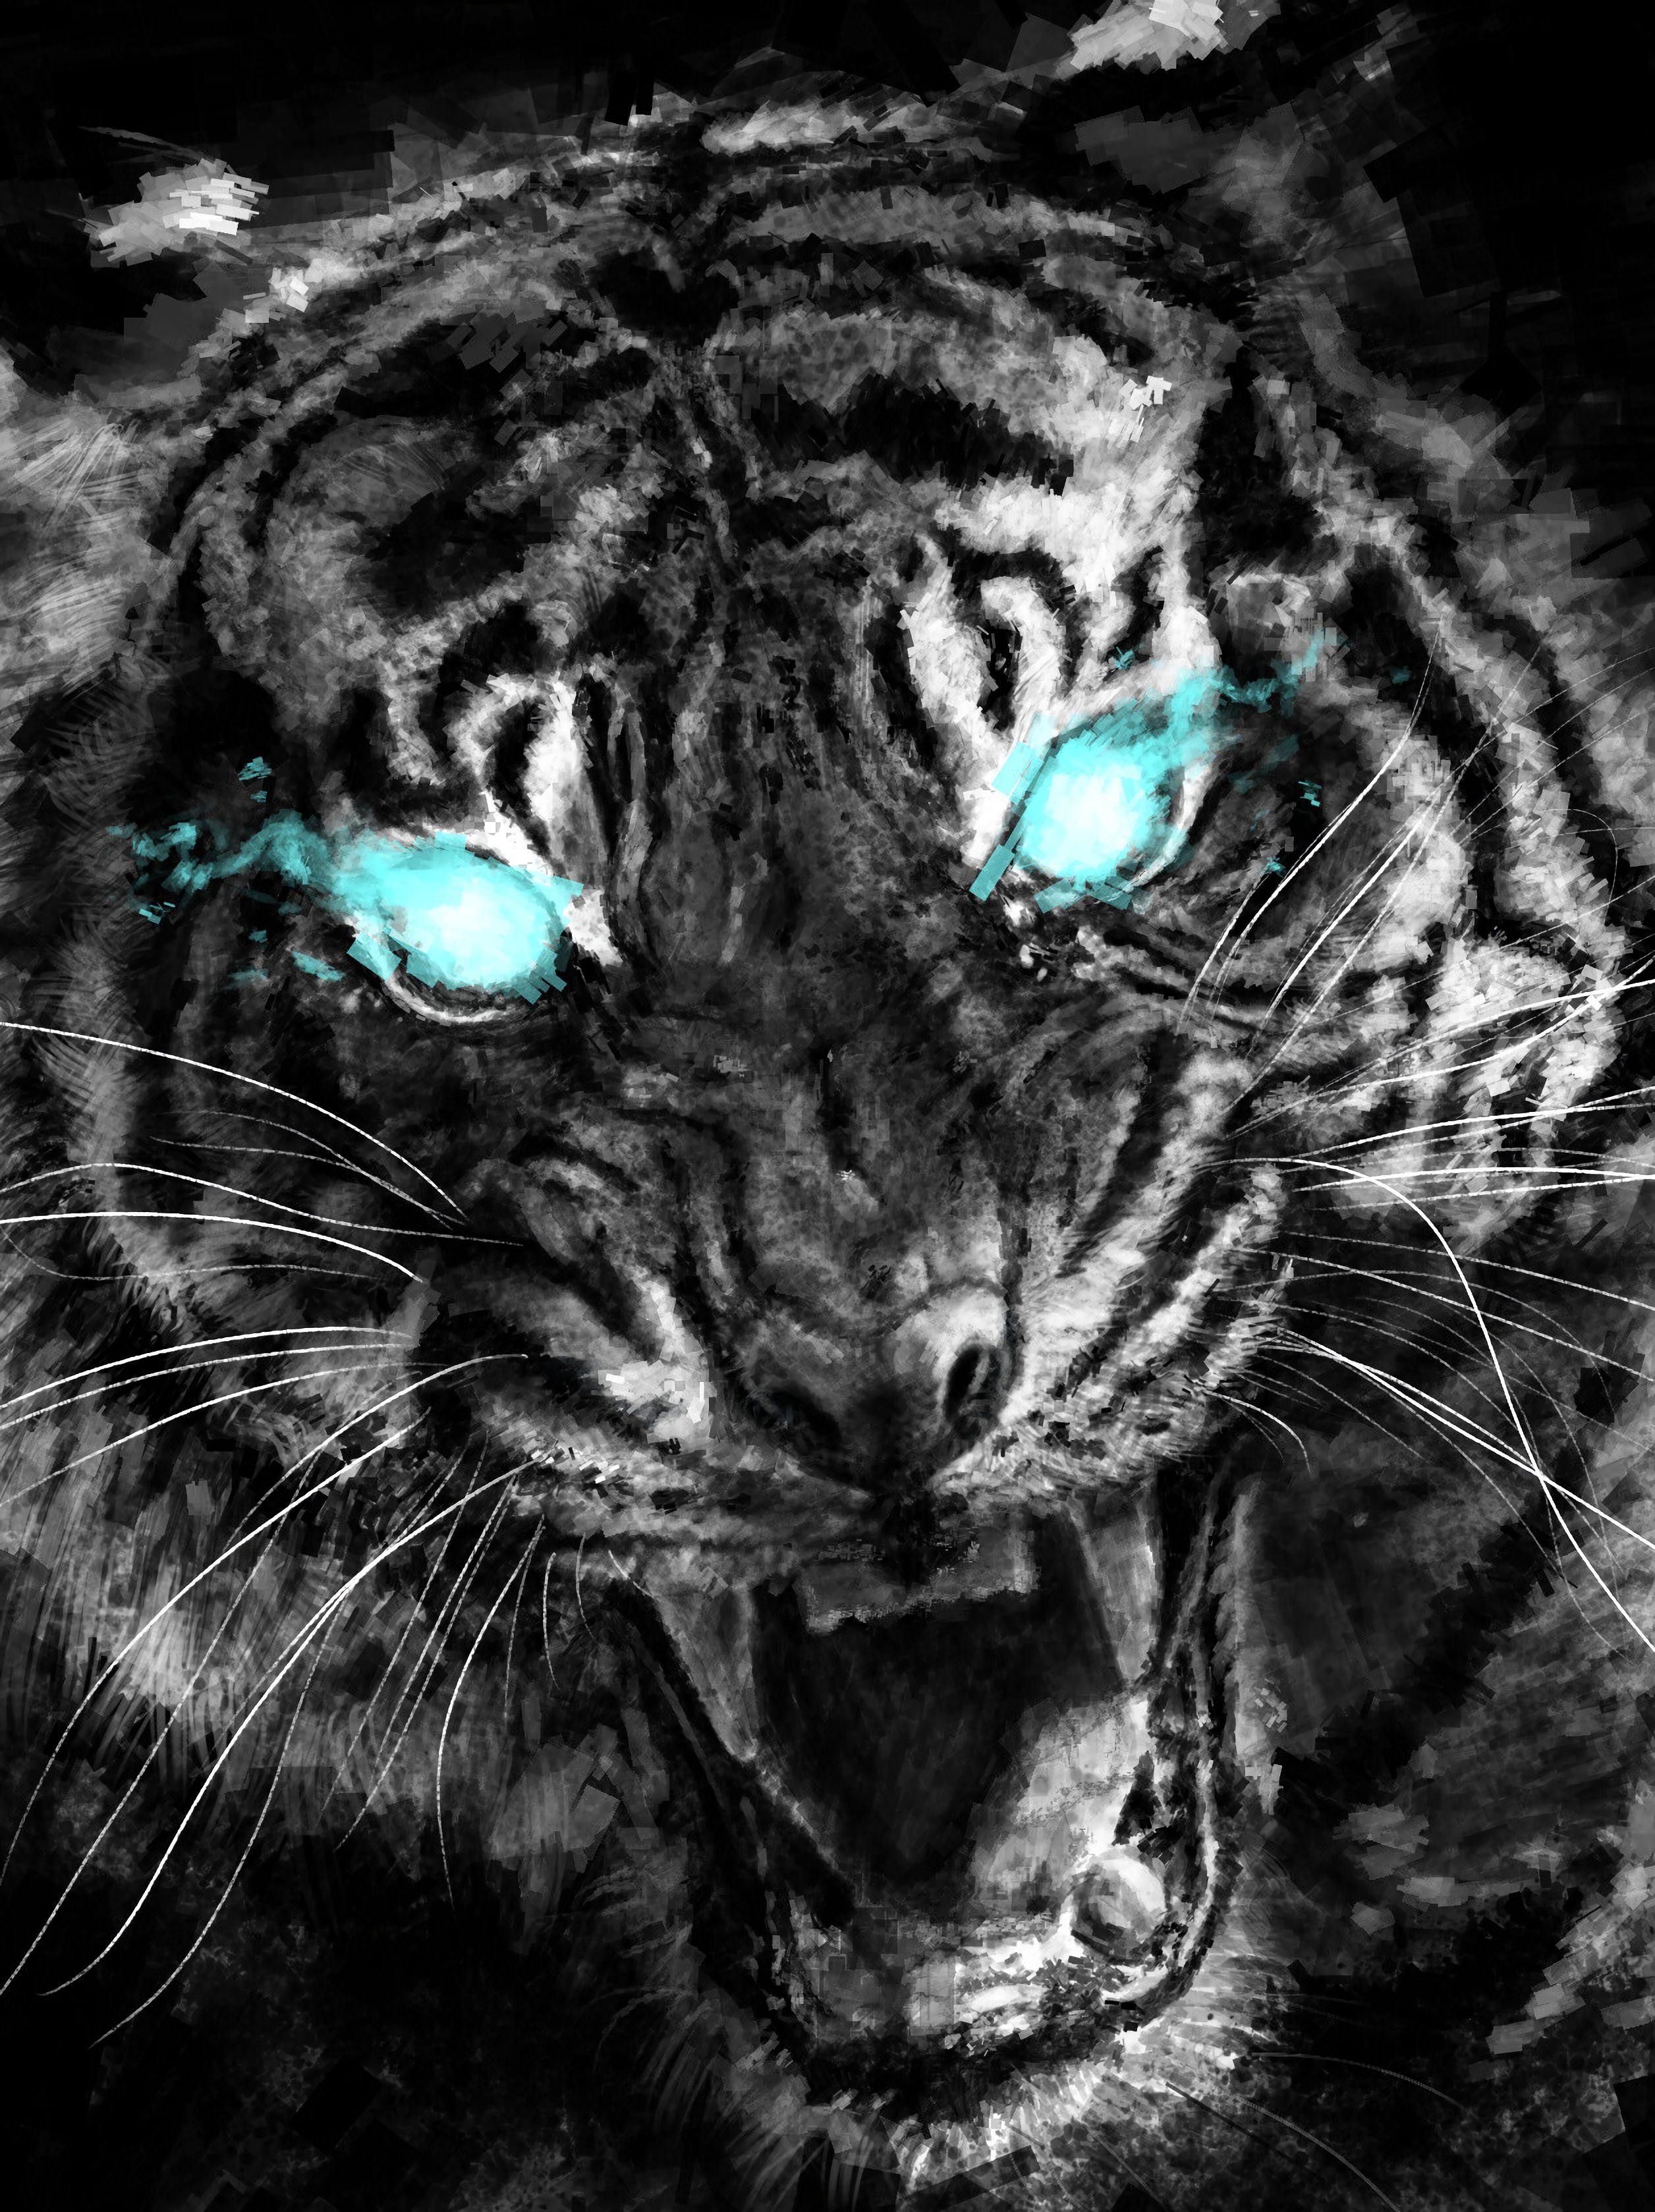 55637 download wallpaper eyes, art, grin, predator, tiger, anger screensavers and pictures for free